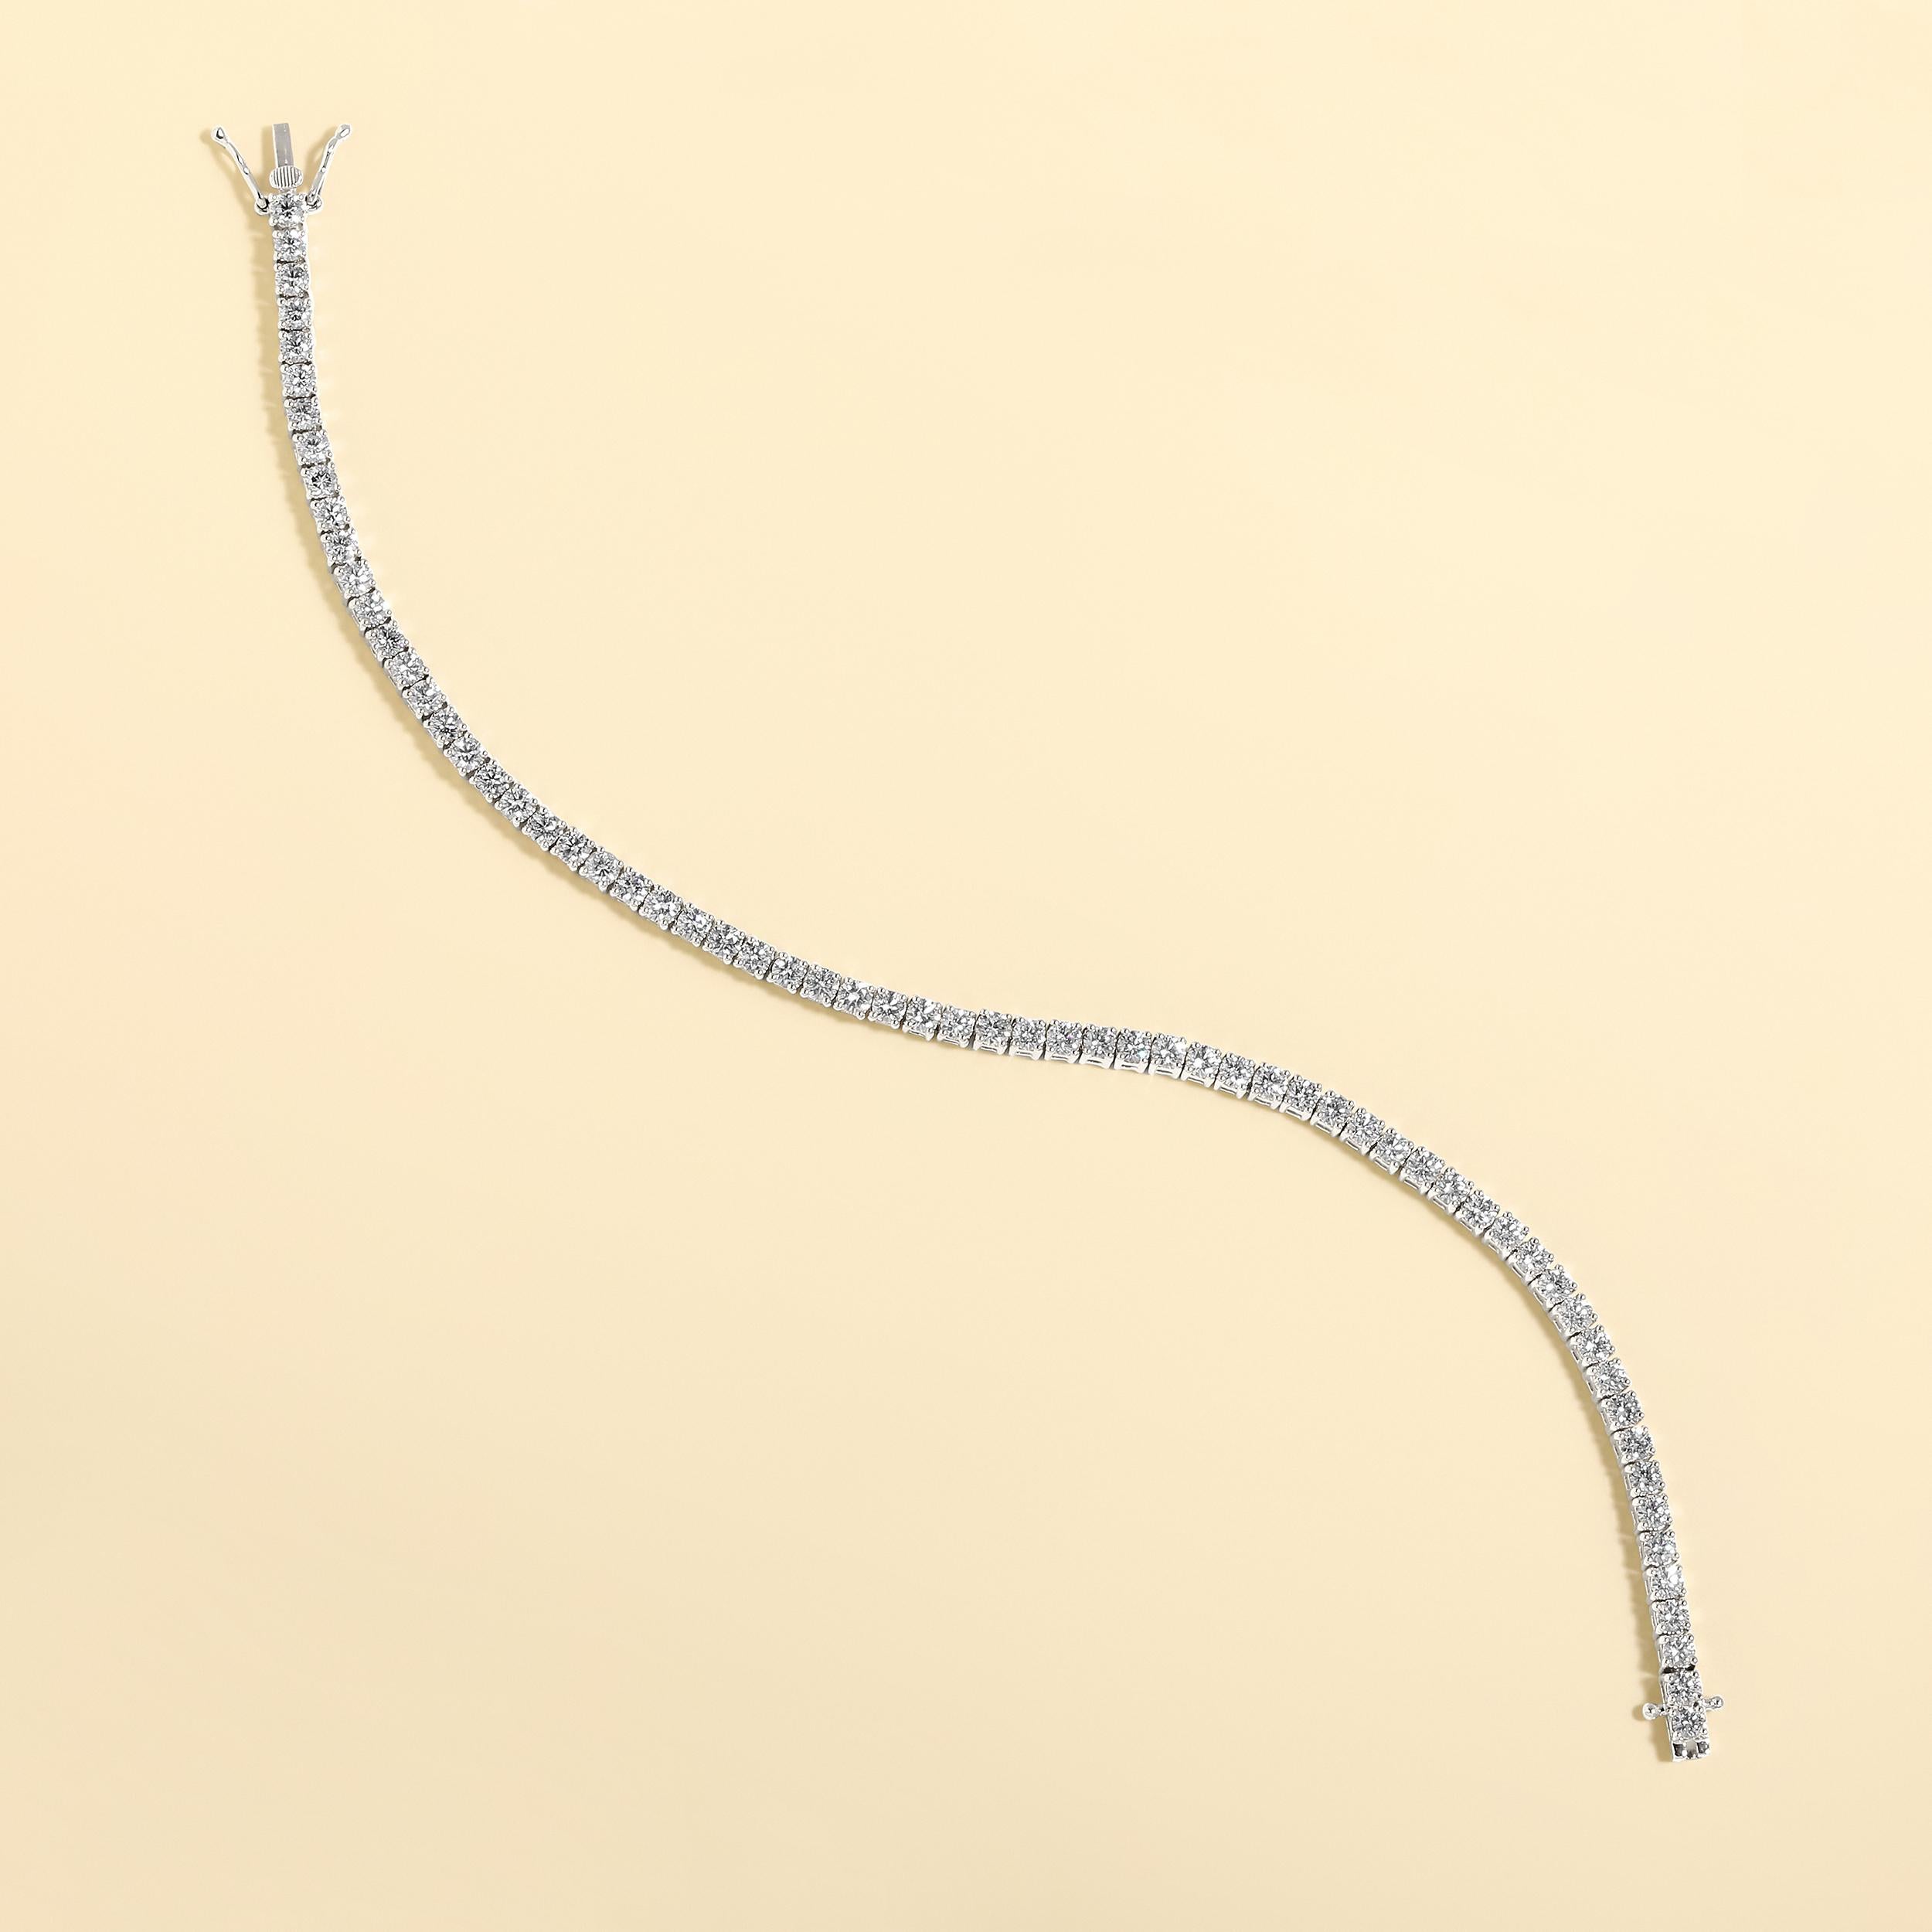 Crafted in 10.24 grams of 14K White Gold, the bracelet contains 66 stones of Round Natural Diamonds with a total of 4.01 carat in G-H color and VS-SI clarity. The bracelet length is 7 inches.
This jewelry piece will be expertly crafted by our